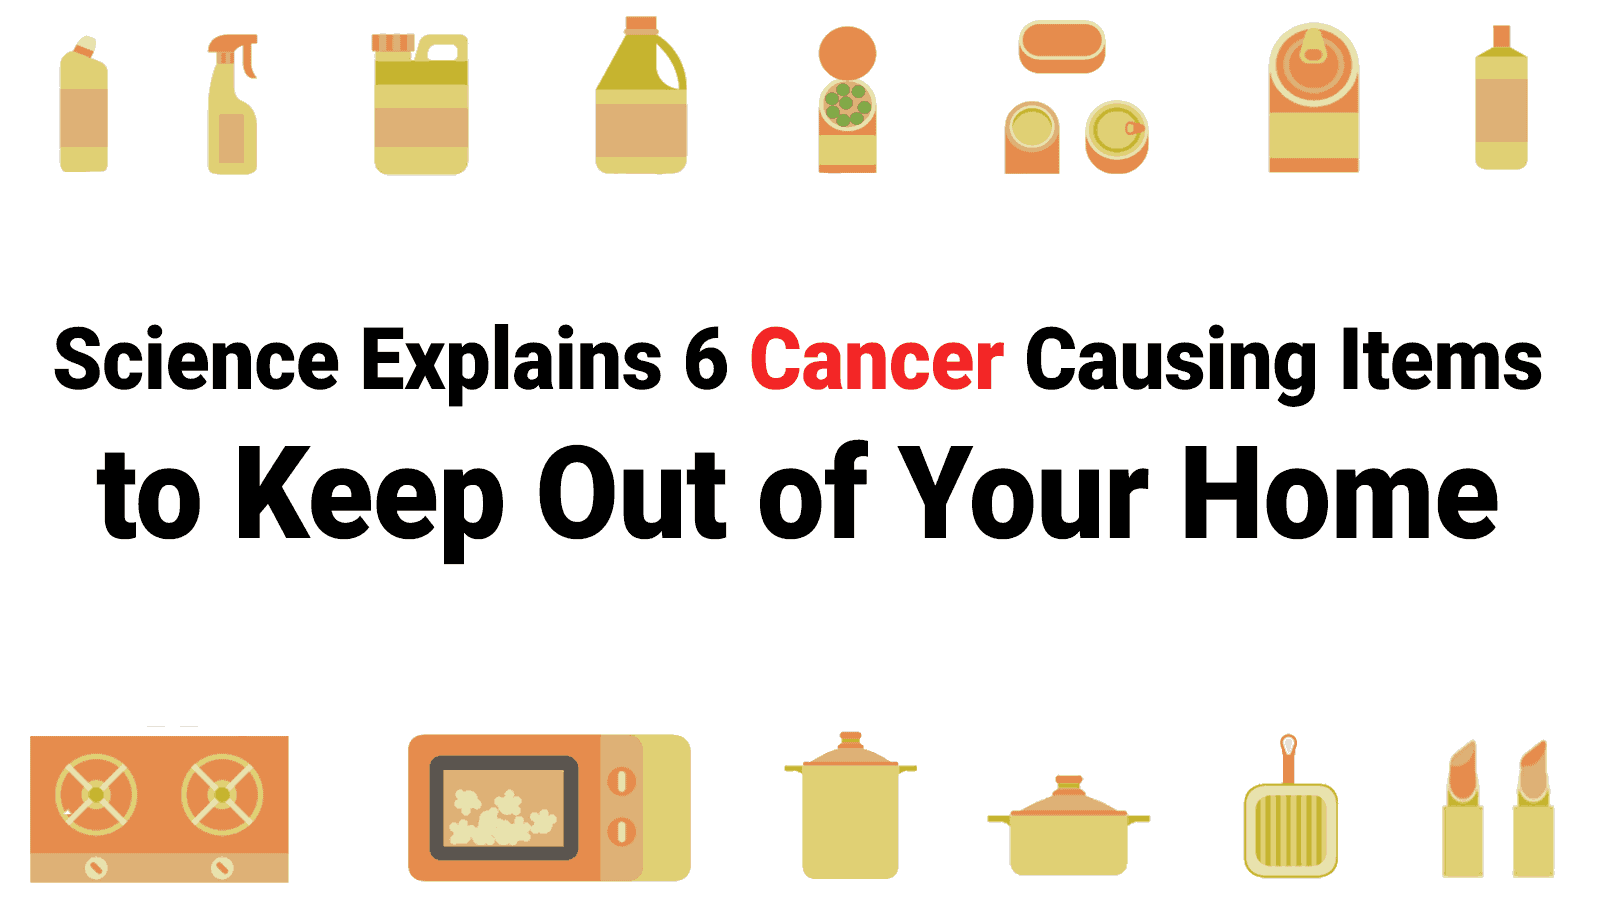 Science Explains 6 Cancer Causing Items to Keep Out of Your Home